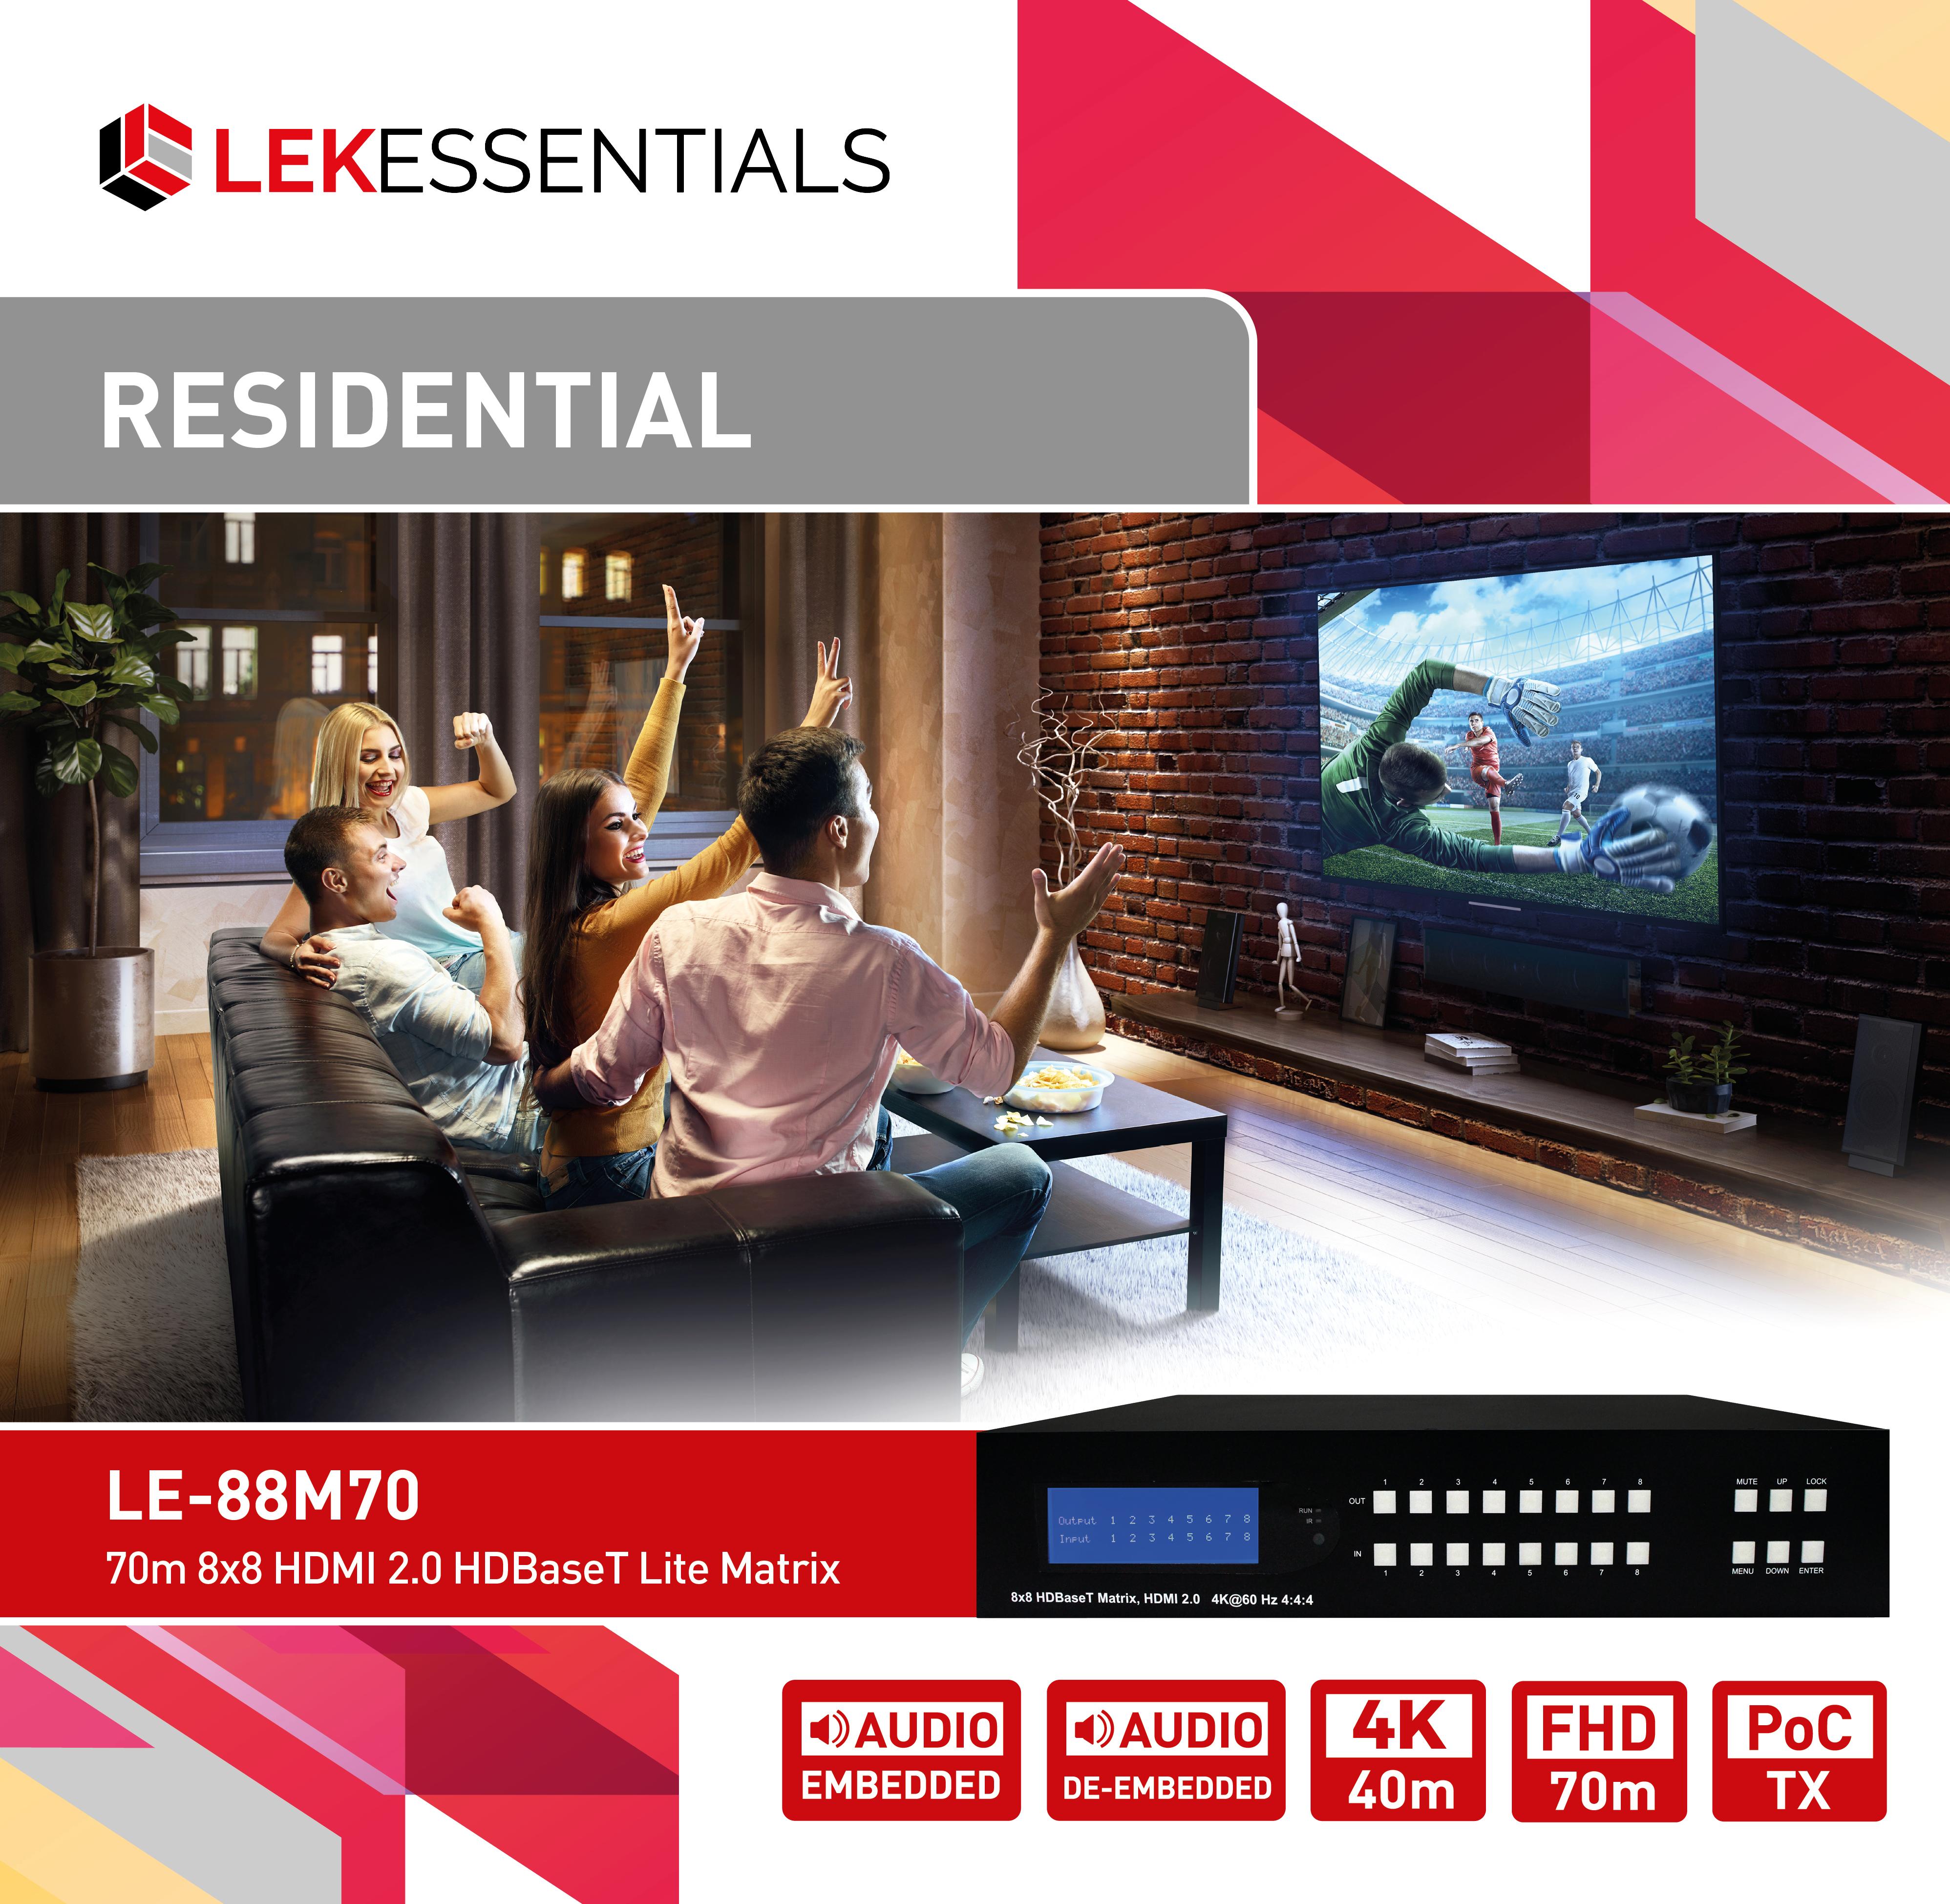 LE-88M70 residential